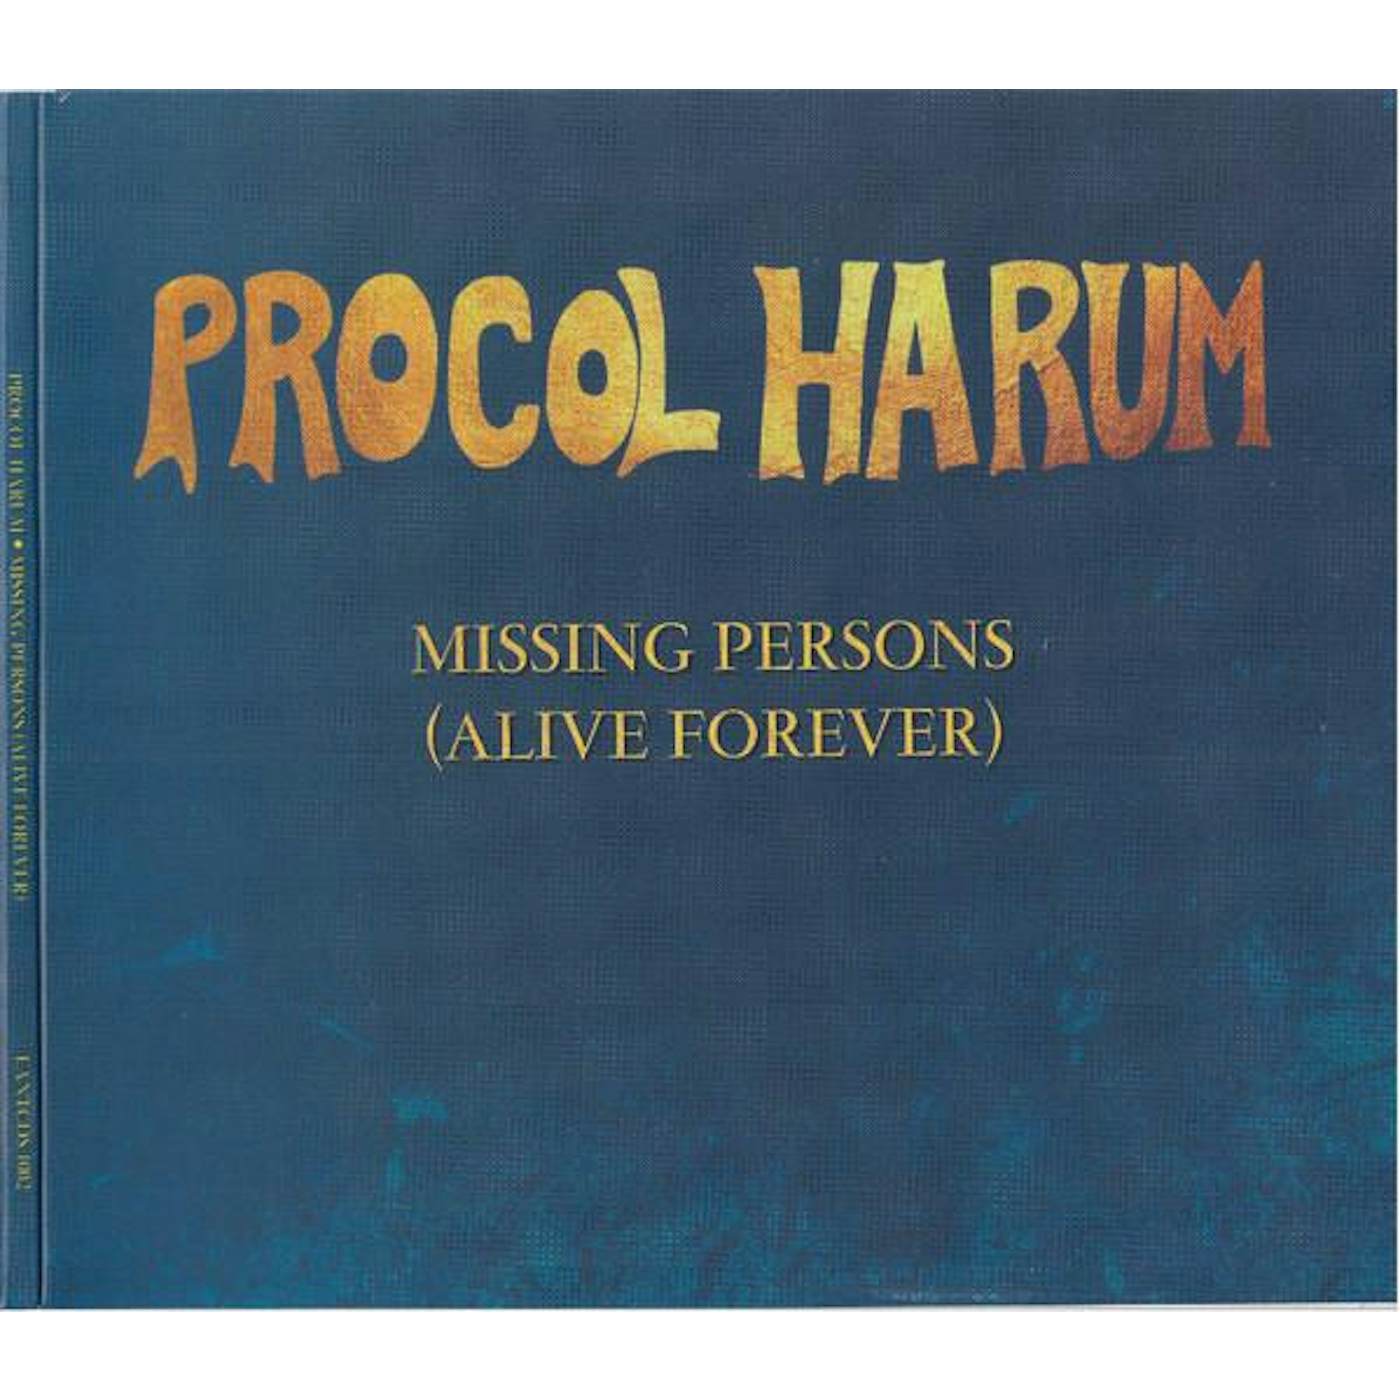 Procol Harum MISSING PERSONS (ALIVE FOREVER) EP CD